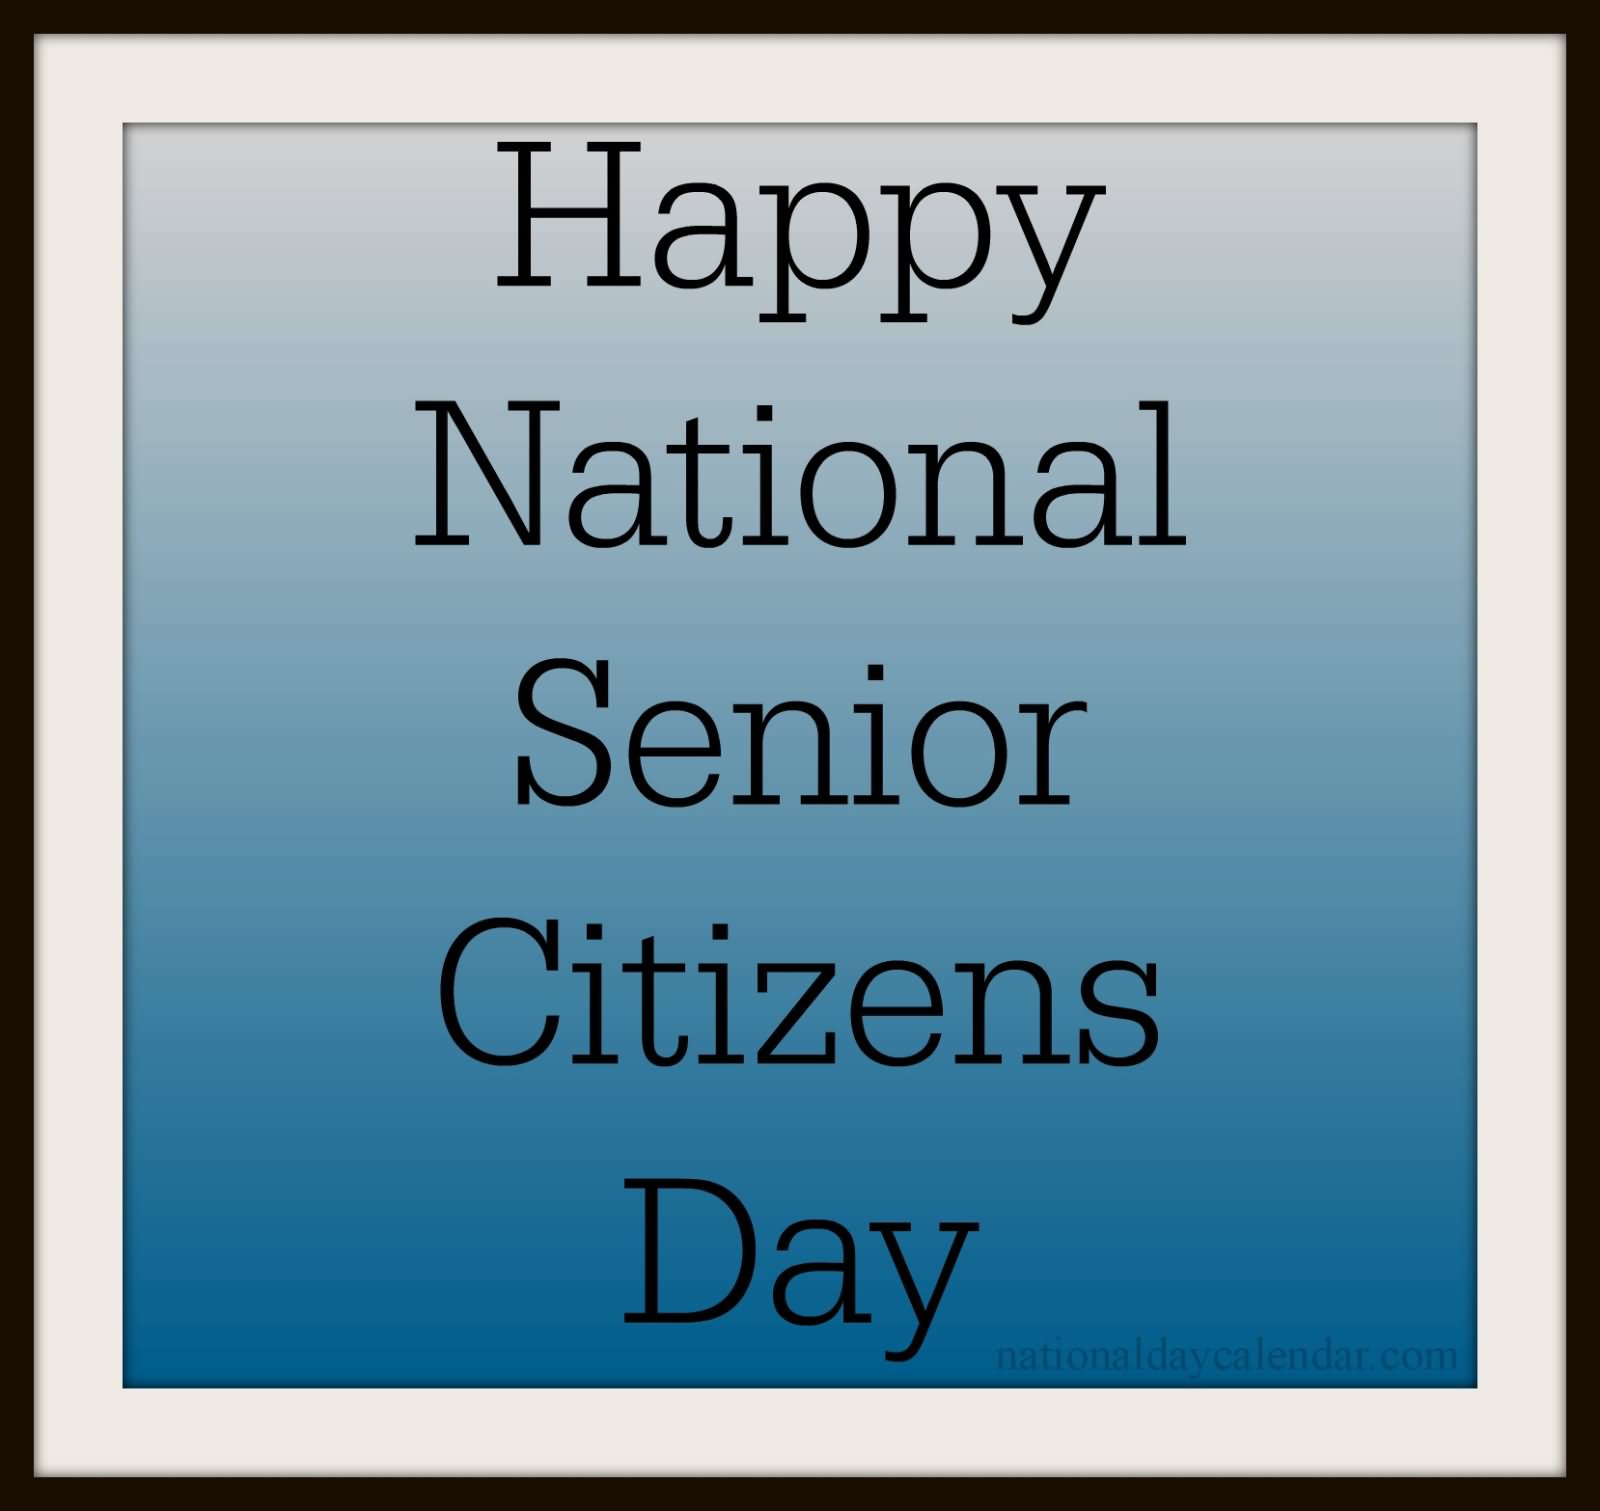 Happy National Senior Citizens Day Greeting Card